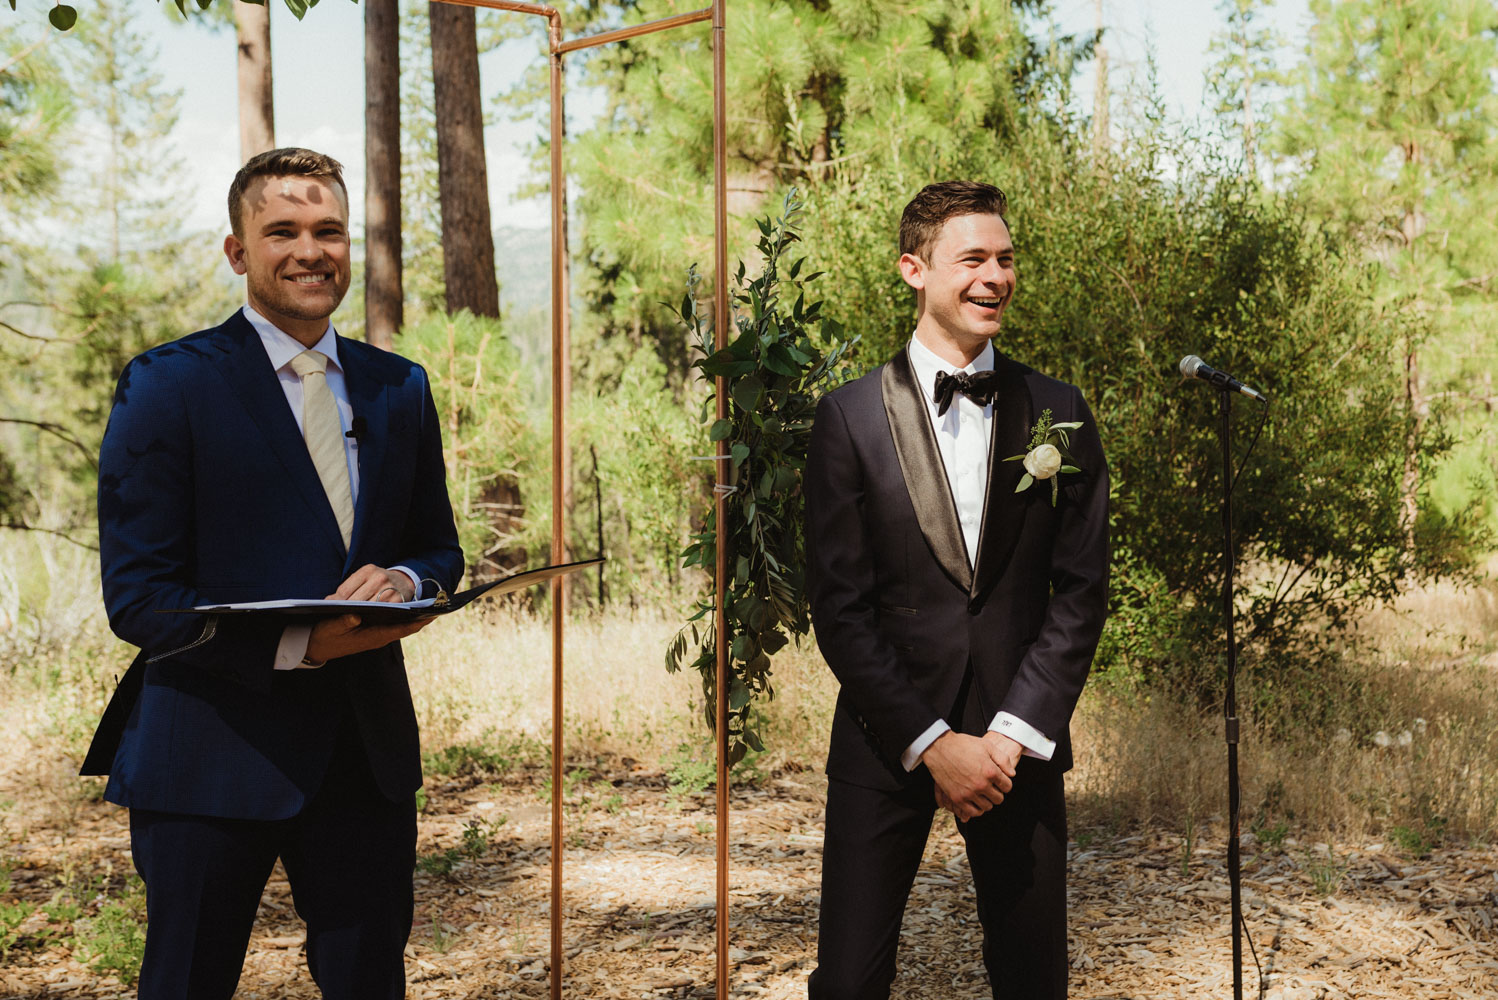 Rush Creek Lodge Wedding, photo of groom seeing his bride for the first time